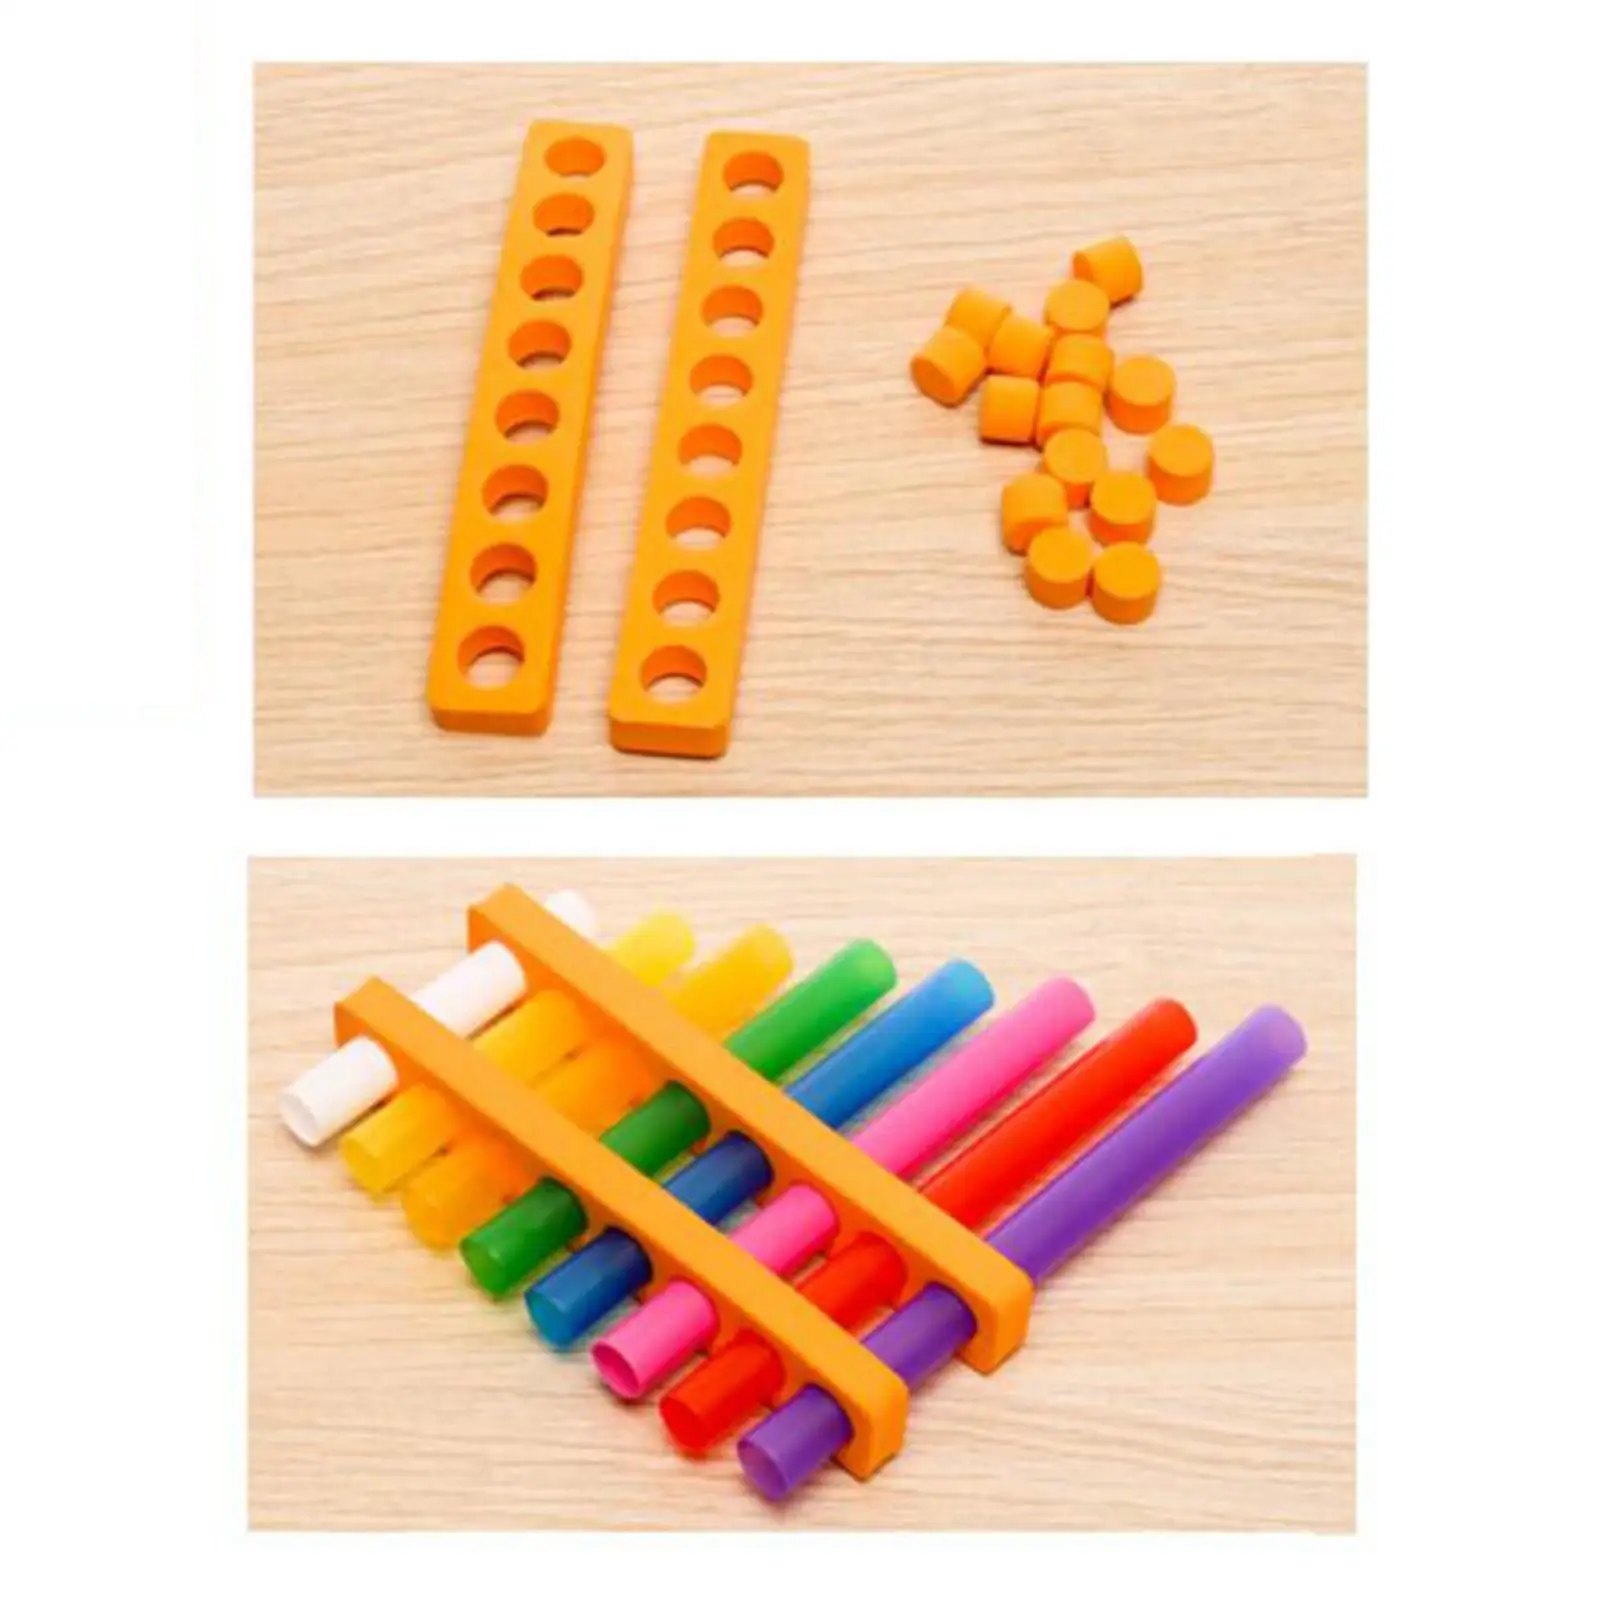 Homemade Pan Flute Small Inventions Musical Instrument Panpipe Toy for Development Toy Party Favor Teaching Aids Creative Gift